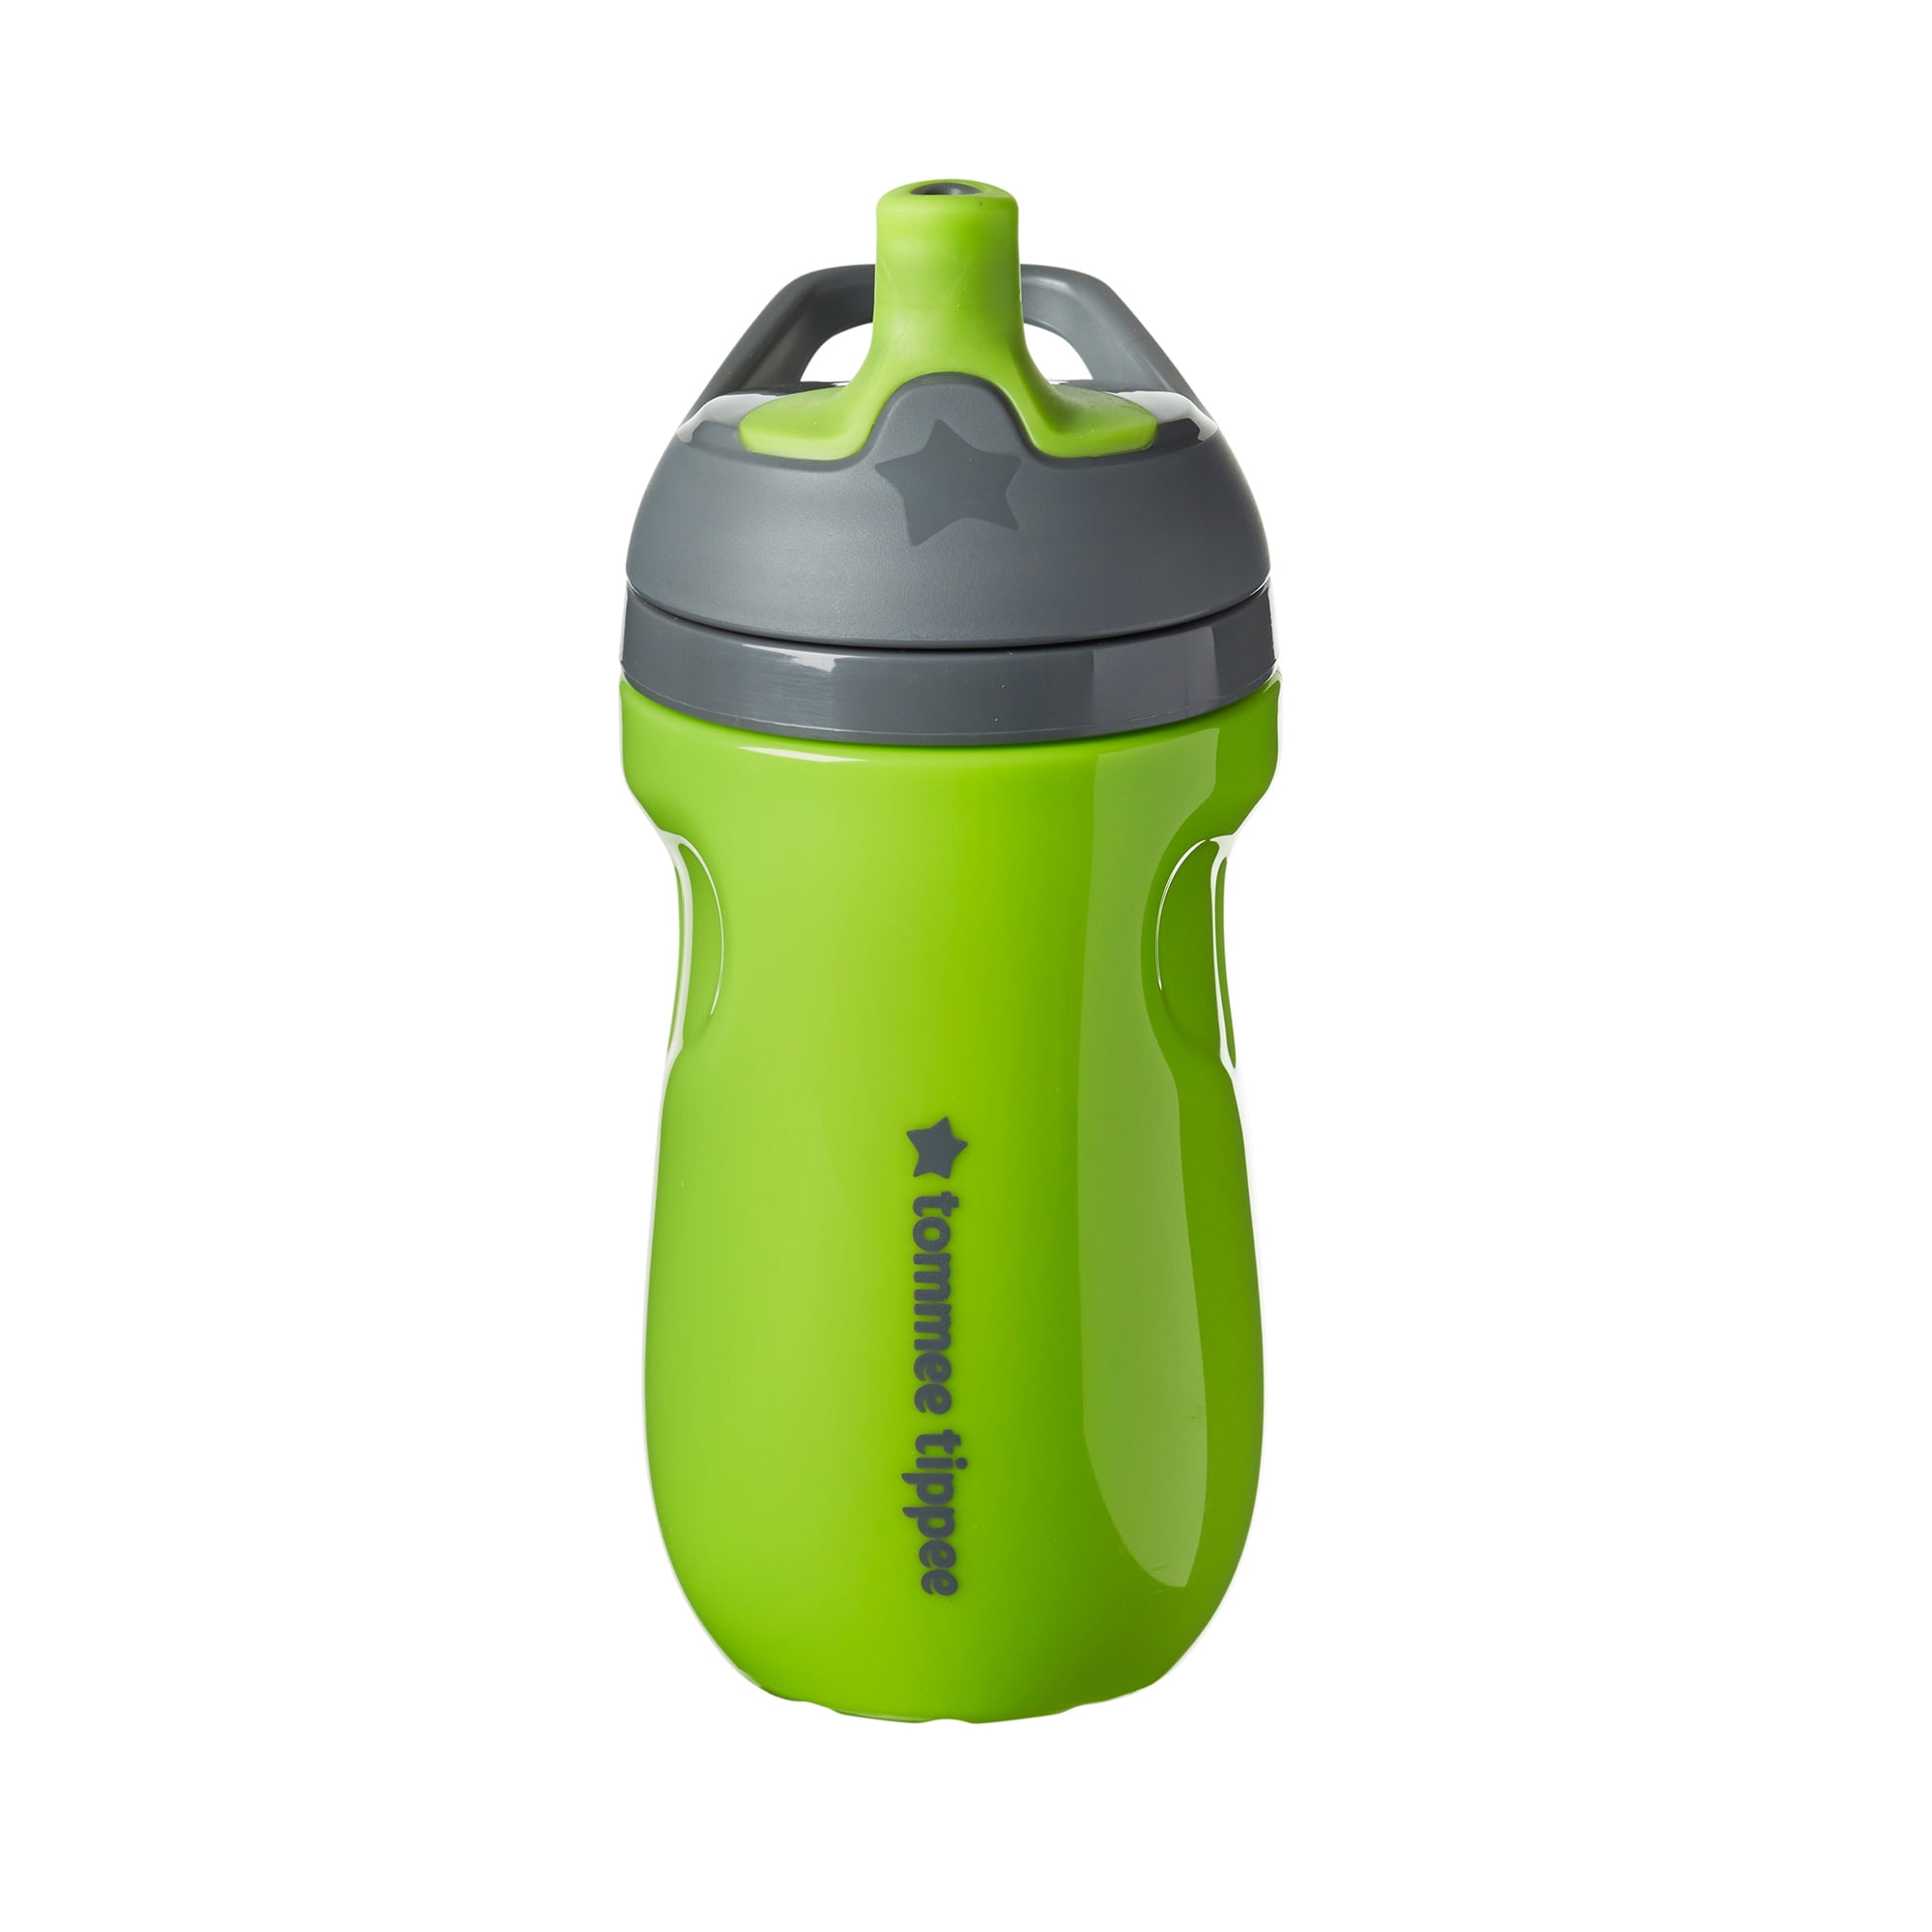 Tommee Tippee Insulated Sporty Bottle, Sippy Cup for Toddlers, 12 months+,  9oz, Spill-Proof, Easy to…See more Tommee Tippee Insulated Sporty Bottle